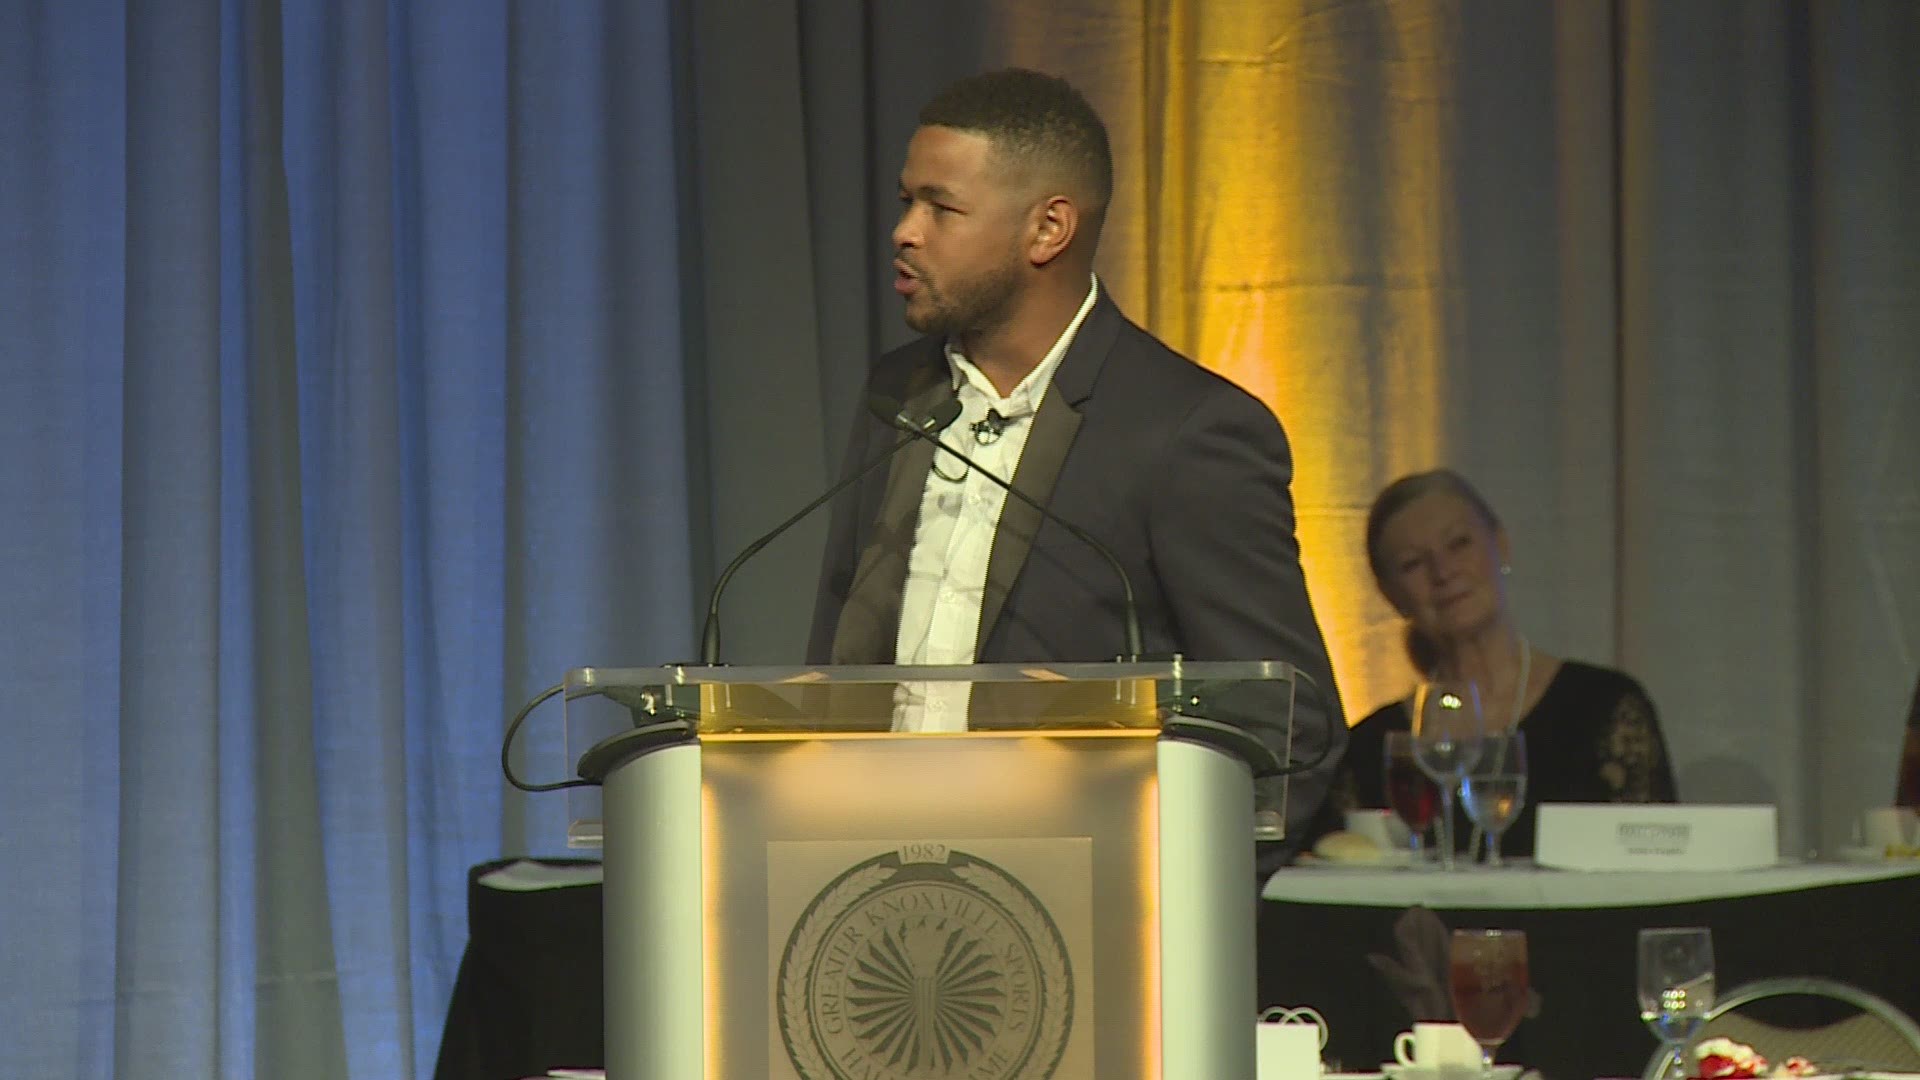 Former Vol Inky Johnson is one of the most inspiring speakers in the country. At the Greater Knoxville Sports Hall of Fame induction ceremony, Inky tells the story of two events that changed his life.